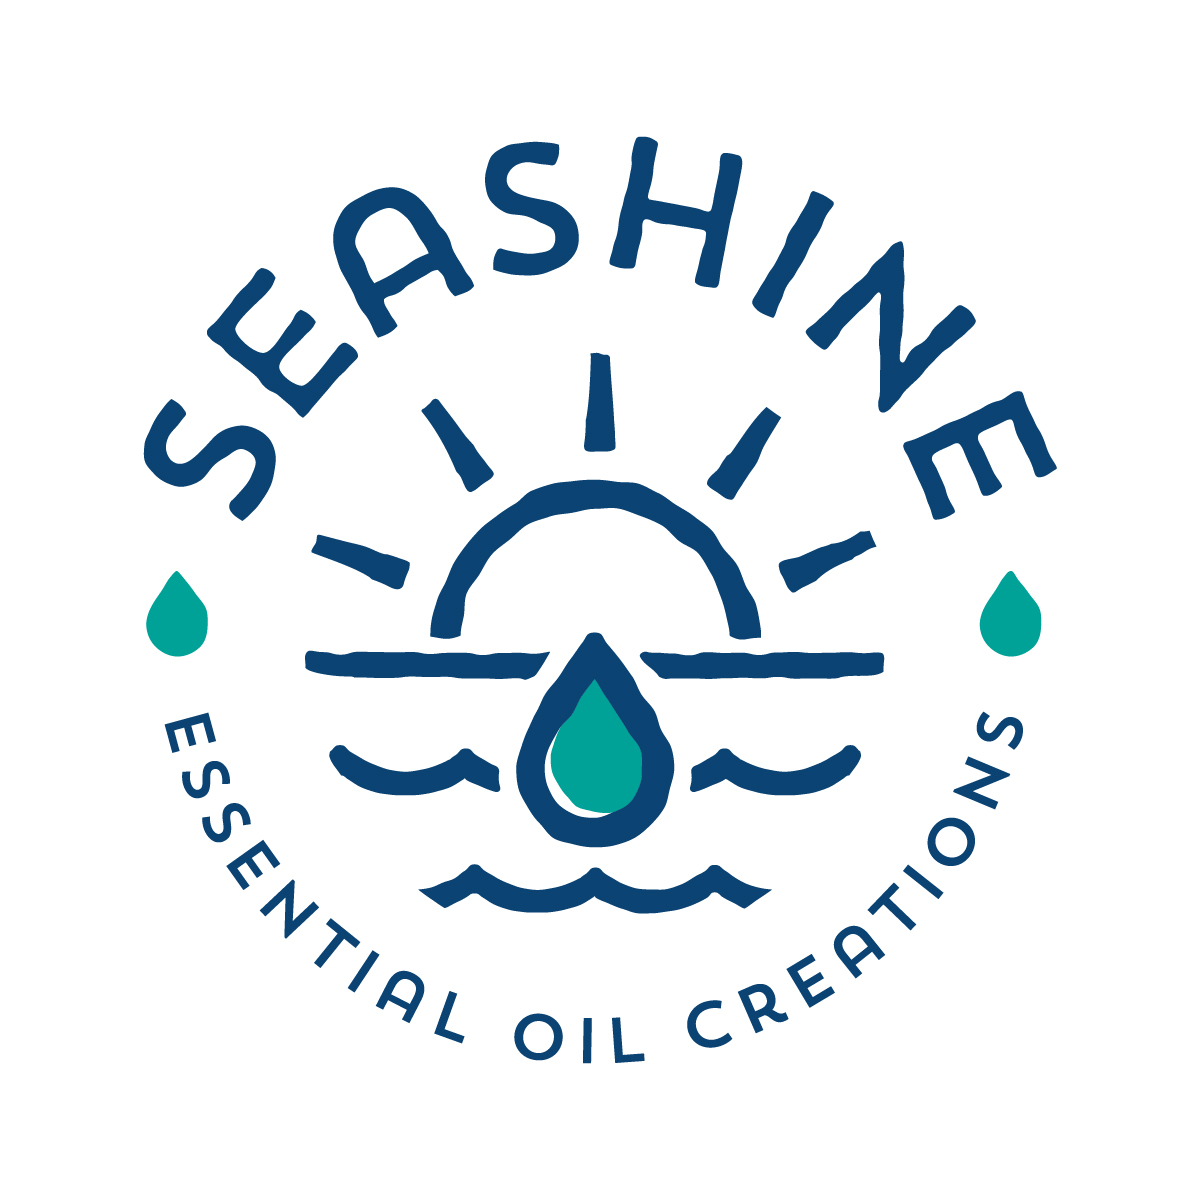 Seashine Essential Oil Creations logo design by logo designer Chad Ehlinger for your inspiration and for the worlds largest logo competition